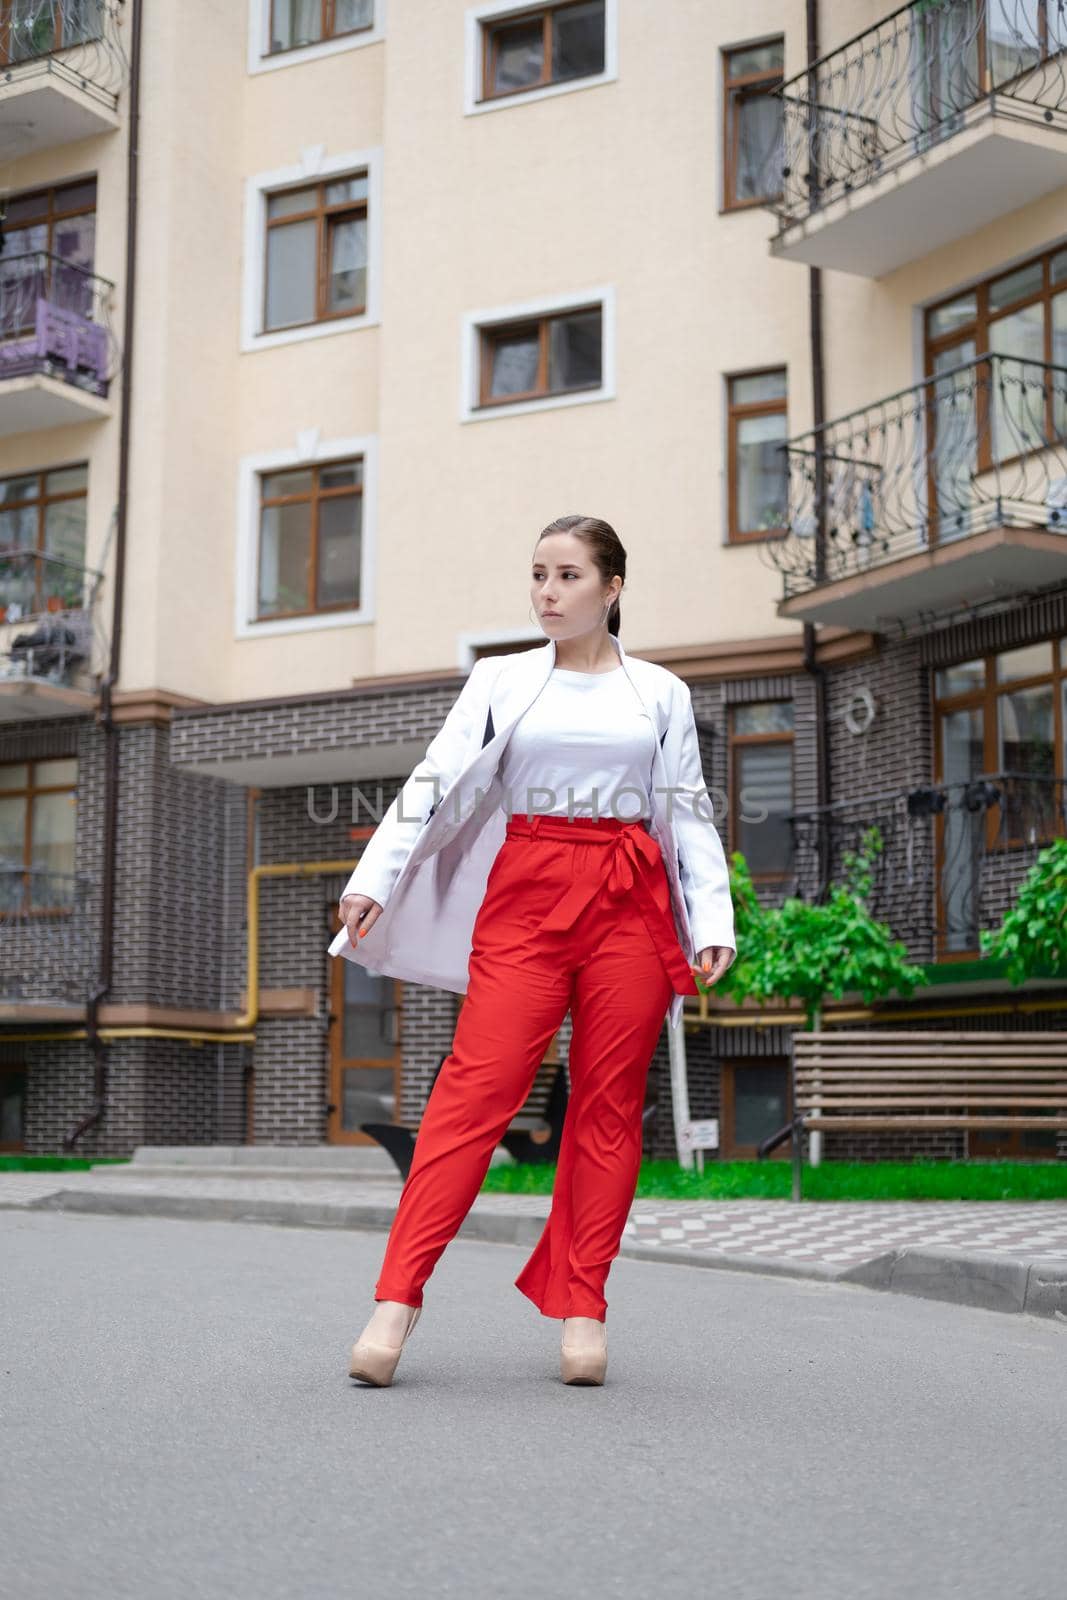 business woman in red pants, white blouse and jacket walking by the street by oliavesna